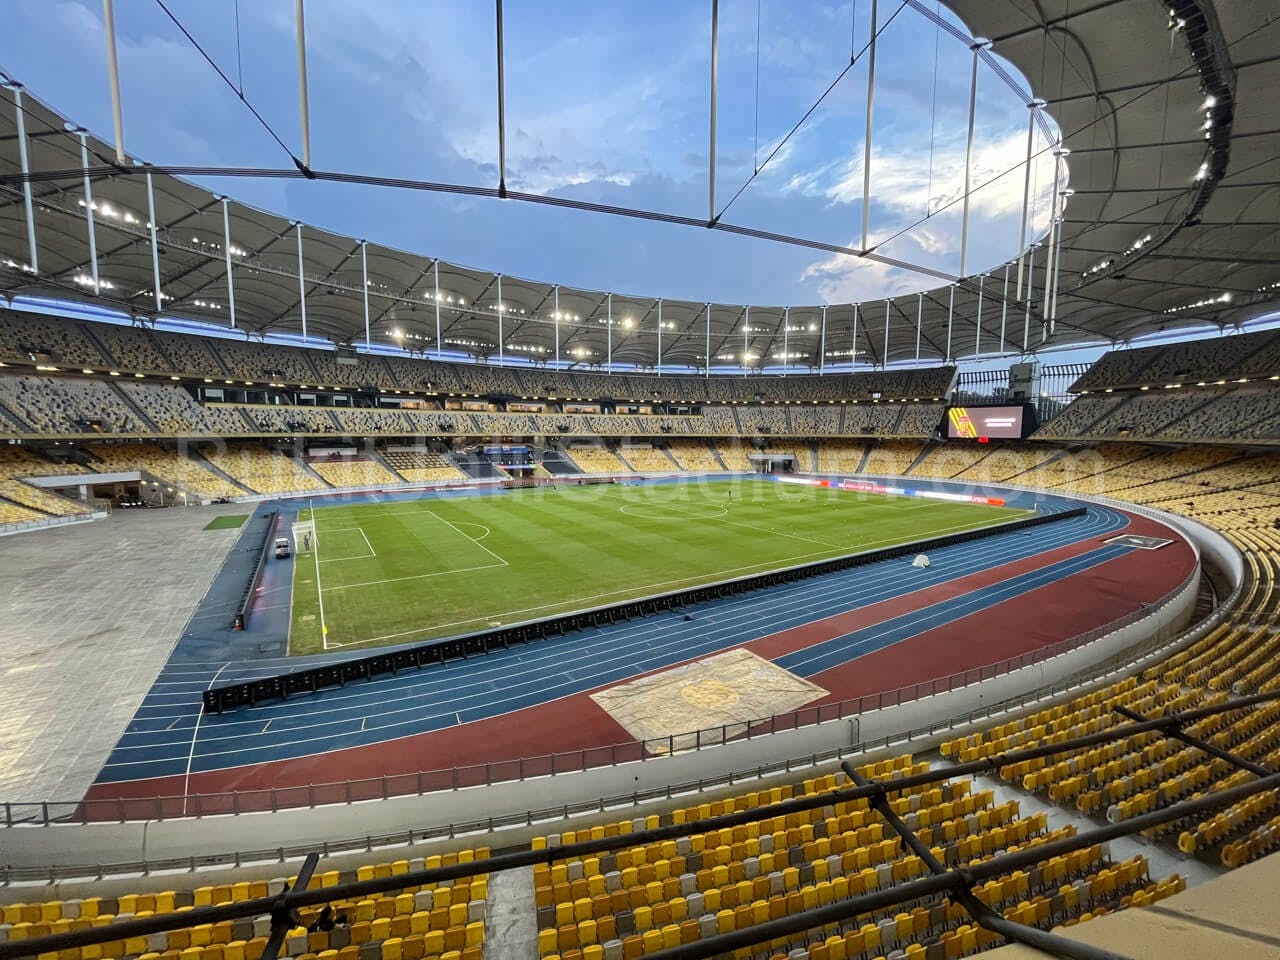 0.5x View of Bukit Jalil field from section 215 of Stadium Bukit Jalil.